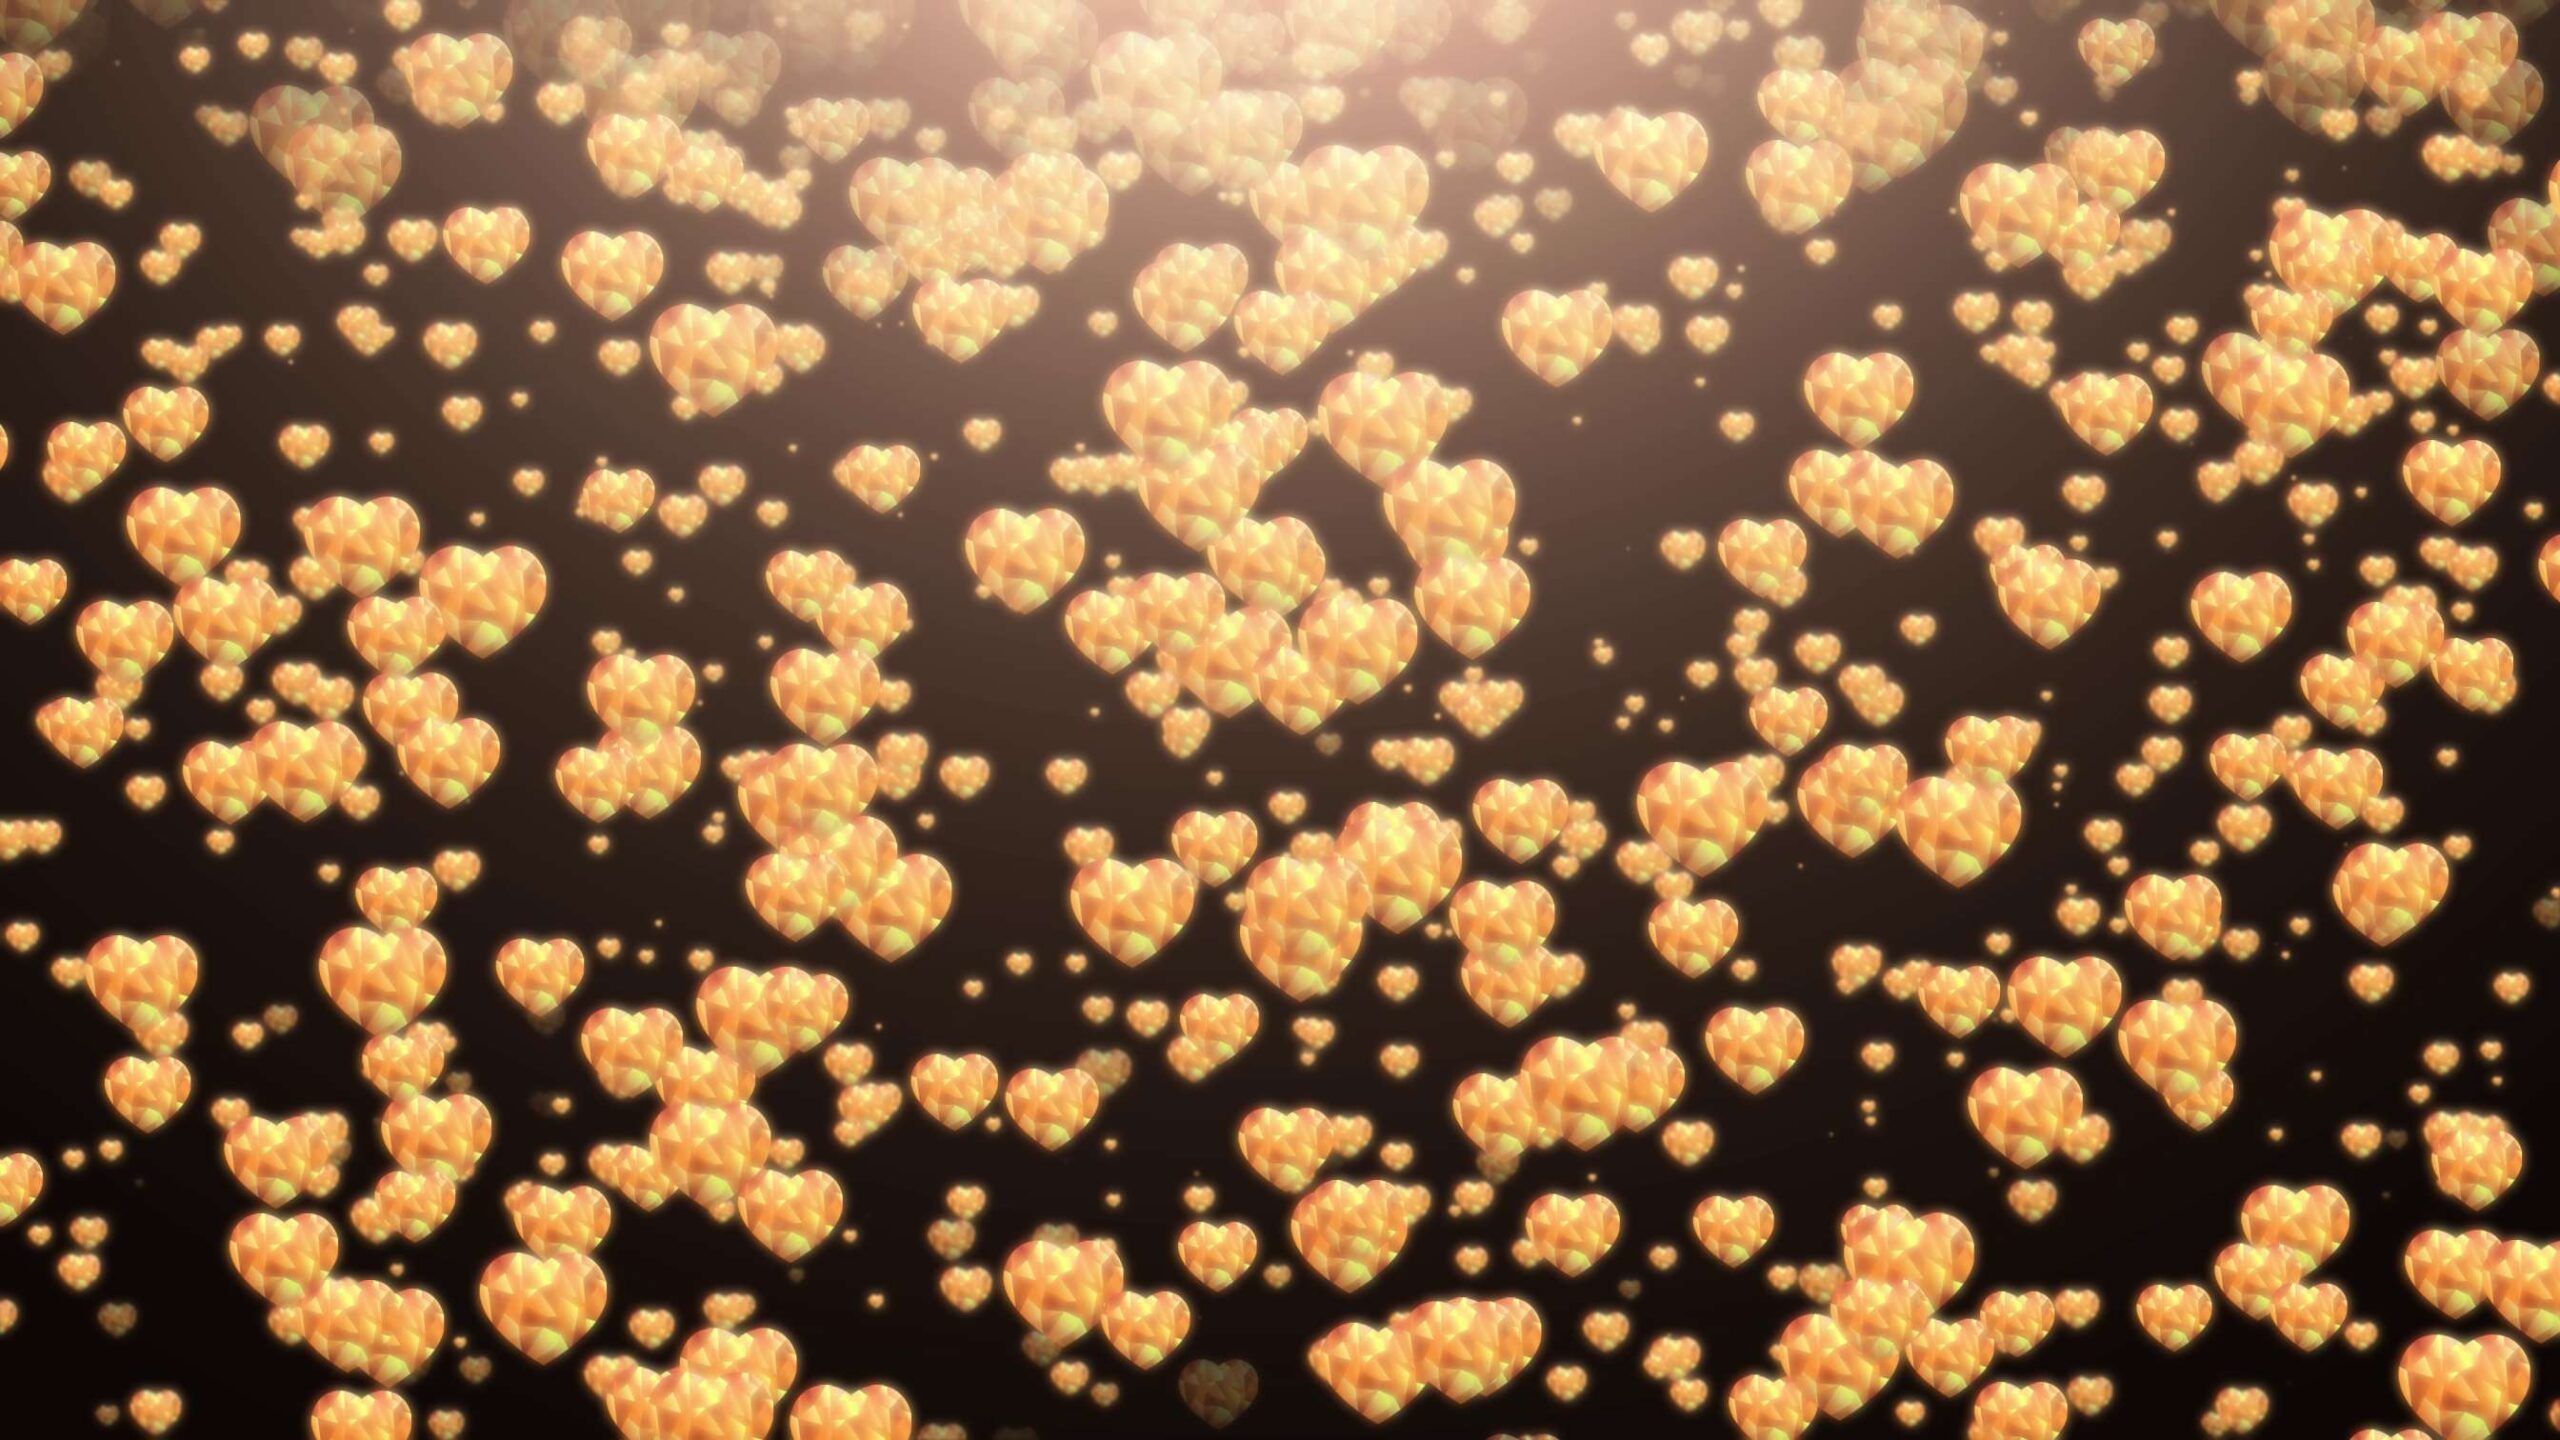 4K Golden Geometric Hearts Background || No Copyright Free Download || Valentine’s Day Screensaver